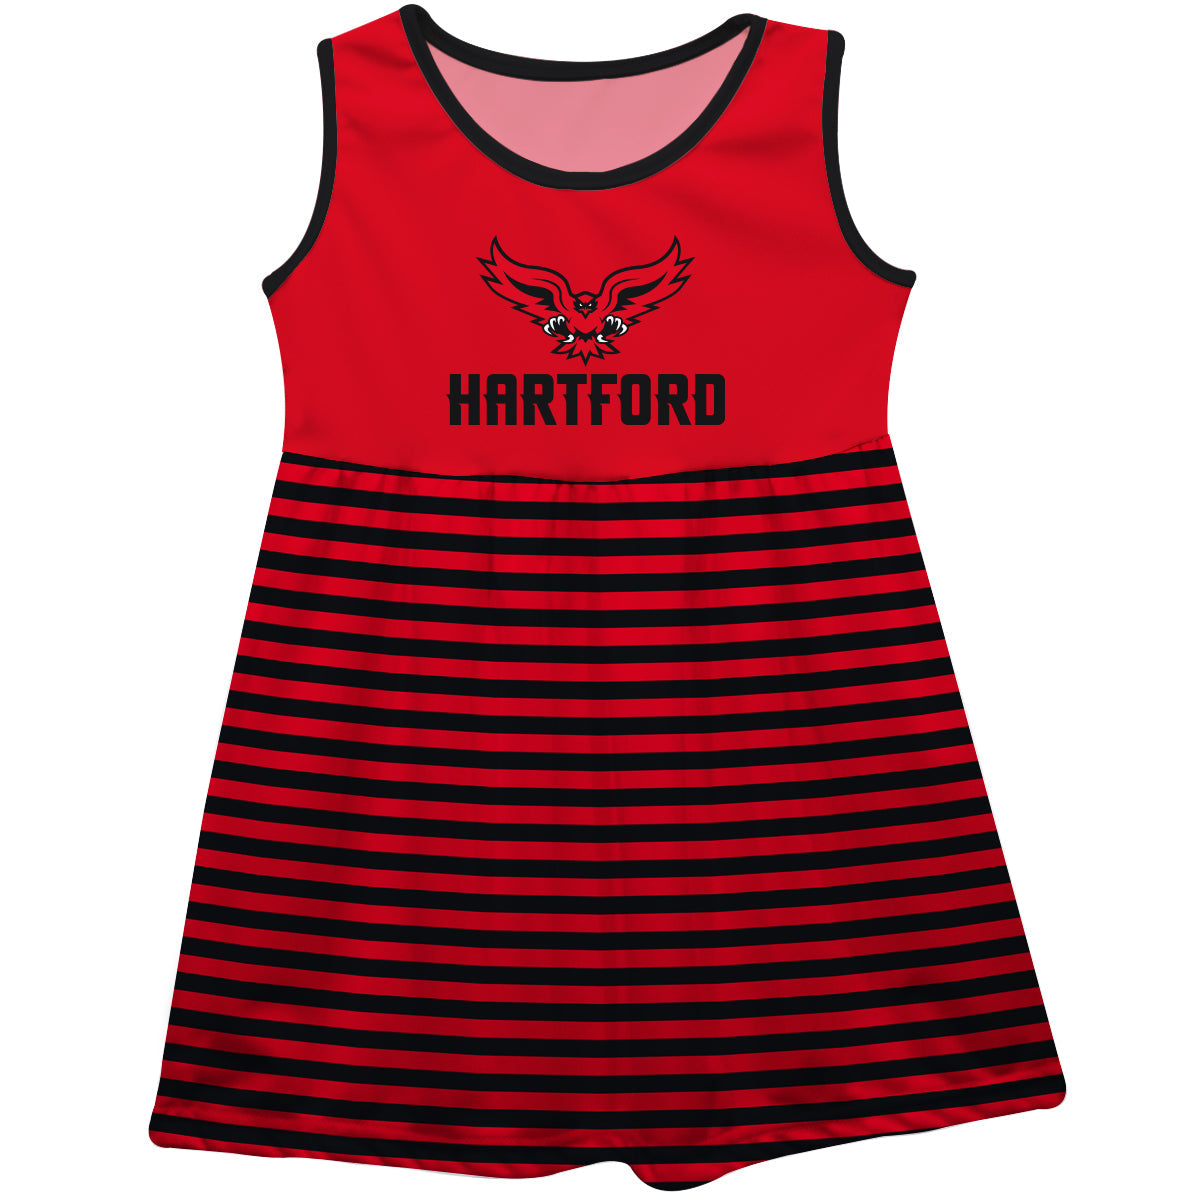 University of Hartford Hawks Red and Black Sleeveless Tank Dress with Stripes on Skirt by Vive La Fete-Campus-Wardrobe